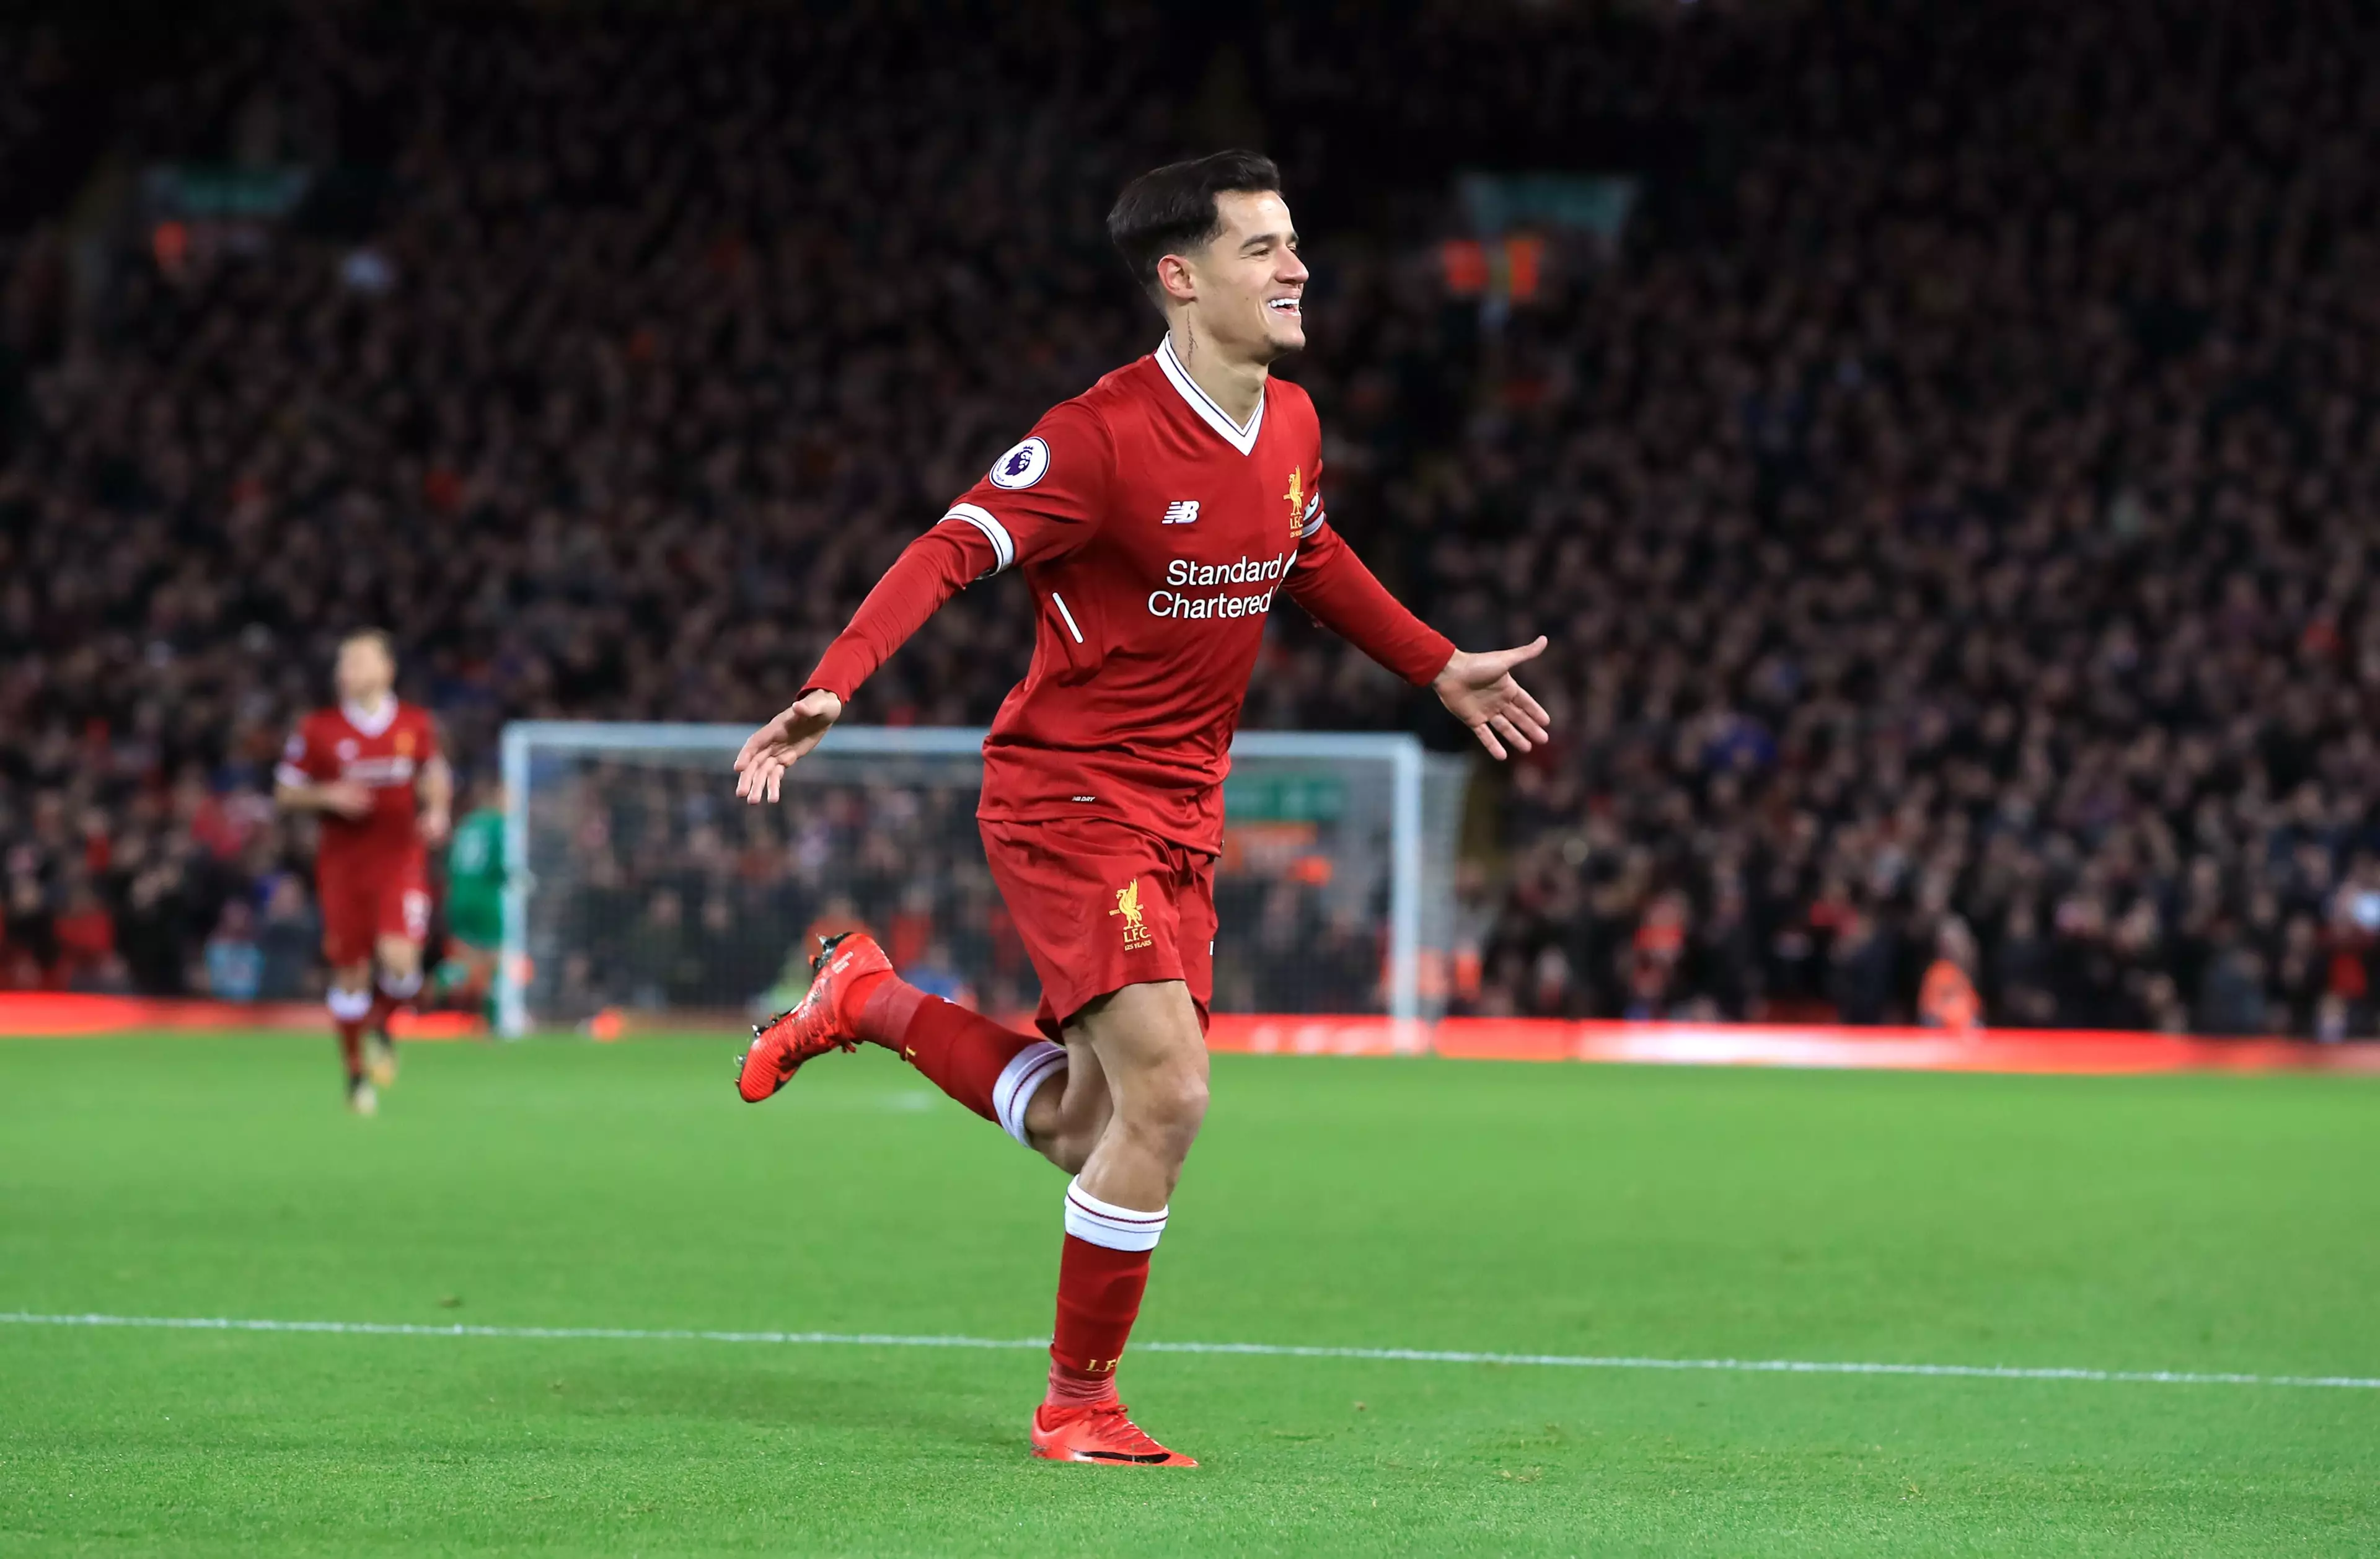 Coutinho has still been brilliant this season despite wanting to leave. Image: PA Images.